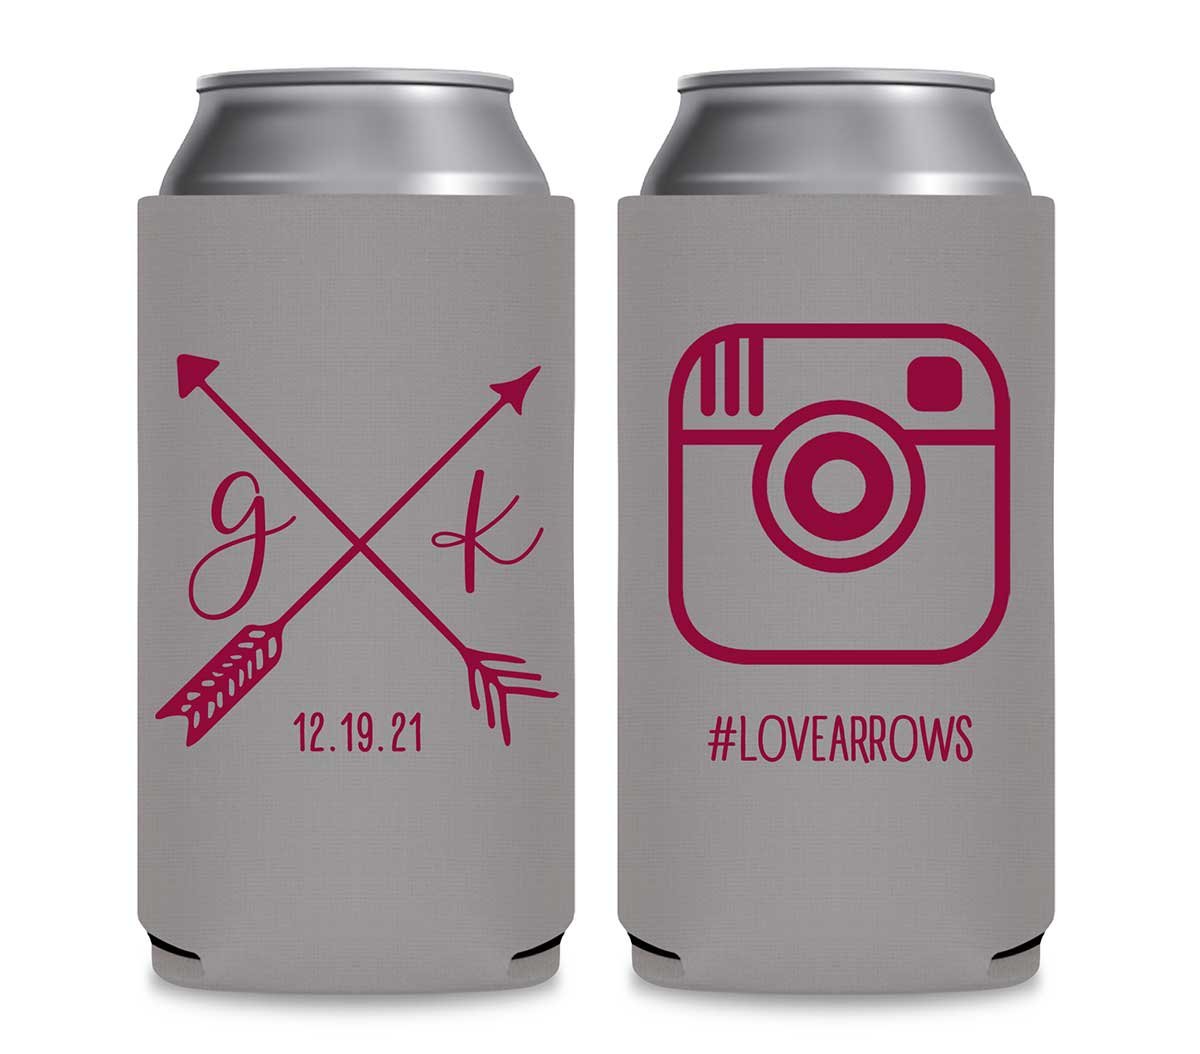 Love Arrows 2C Instagram Hashtag Foldable 12 oz Slim Can Koozies Wedding Gifts for Guests